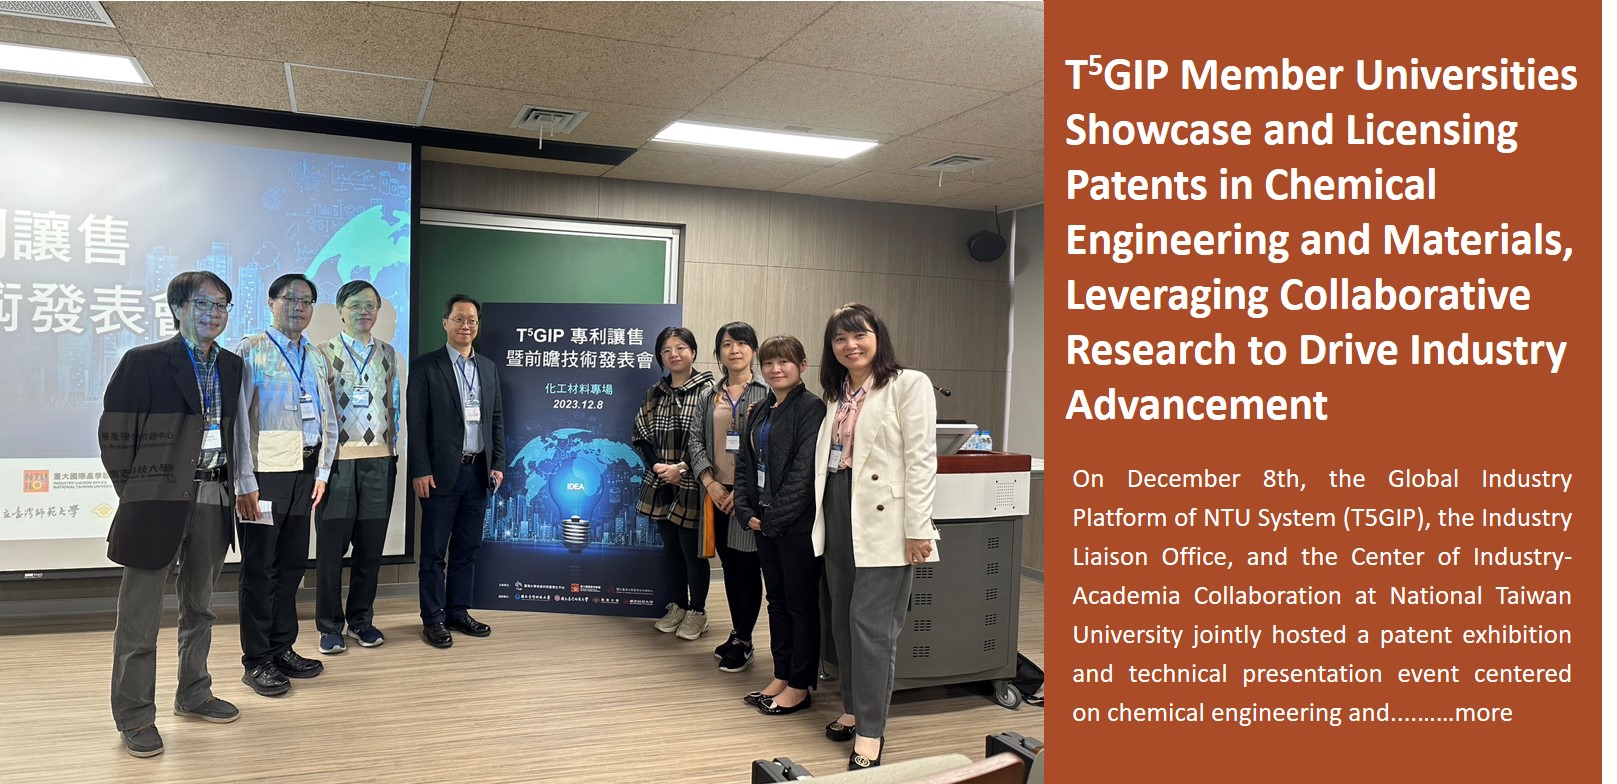 T5GIP Member Universities Showcase and Licensing Patents in Chemical Engineering and Materials, Leveraging Collaborative Research to Drive Industry Advancement